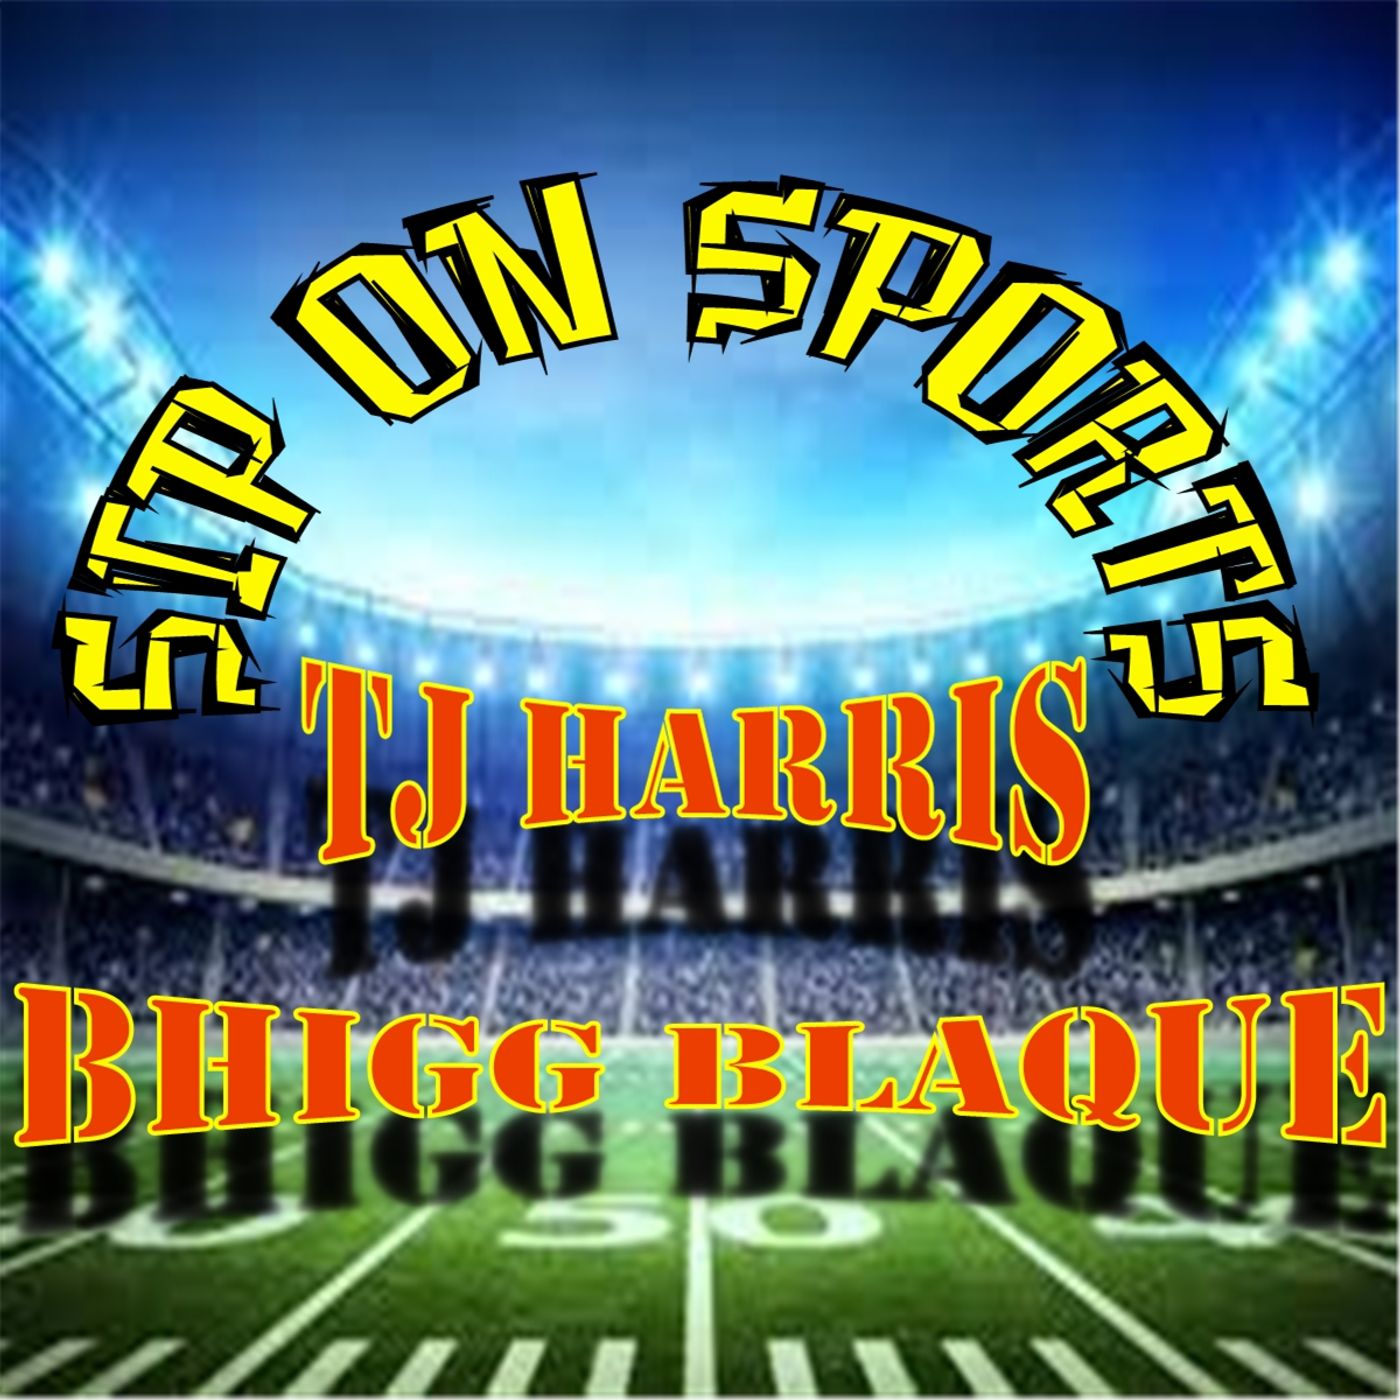 SIP Sports- NFL Week 4 Picks and The Top 40 NBA players #21-25